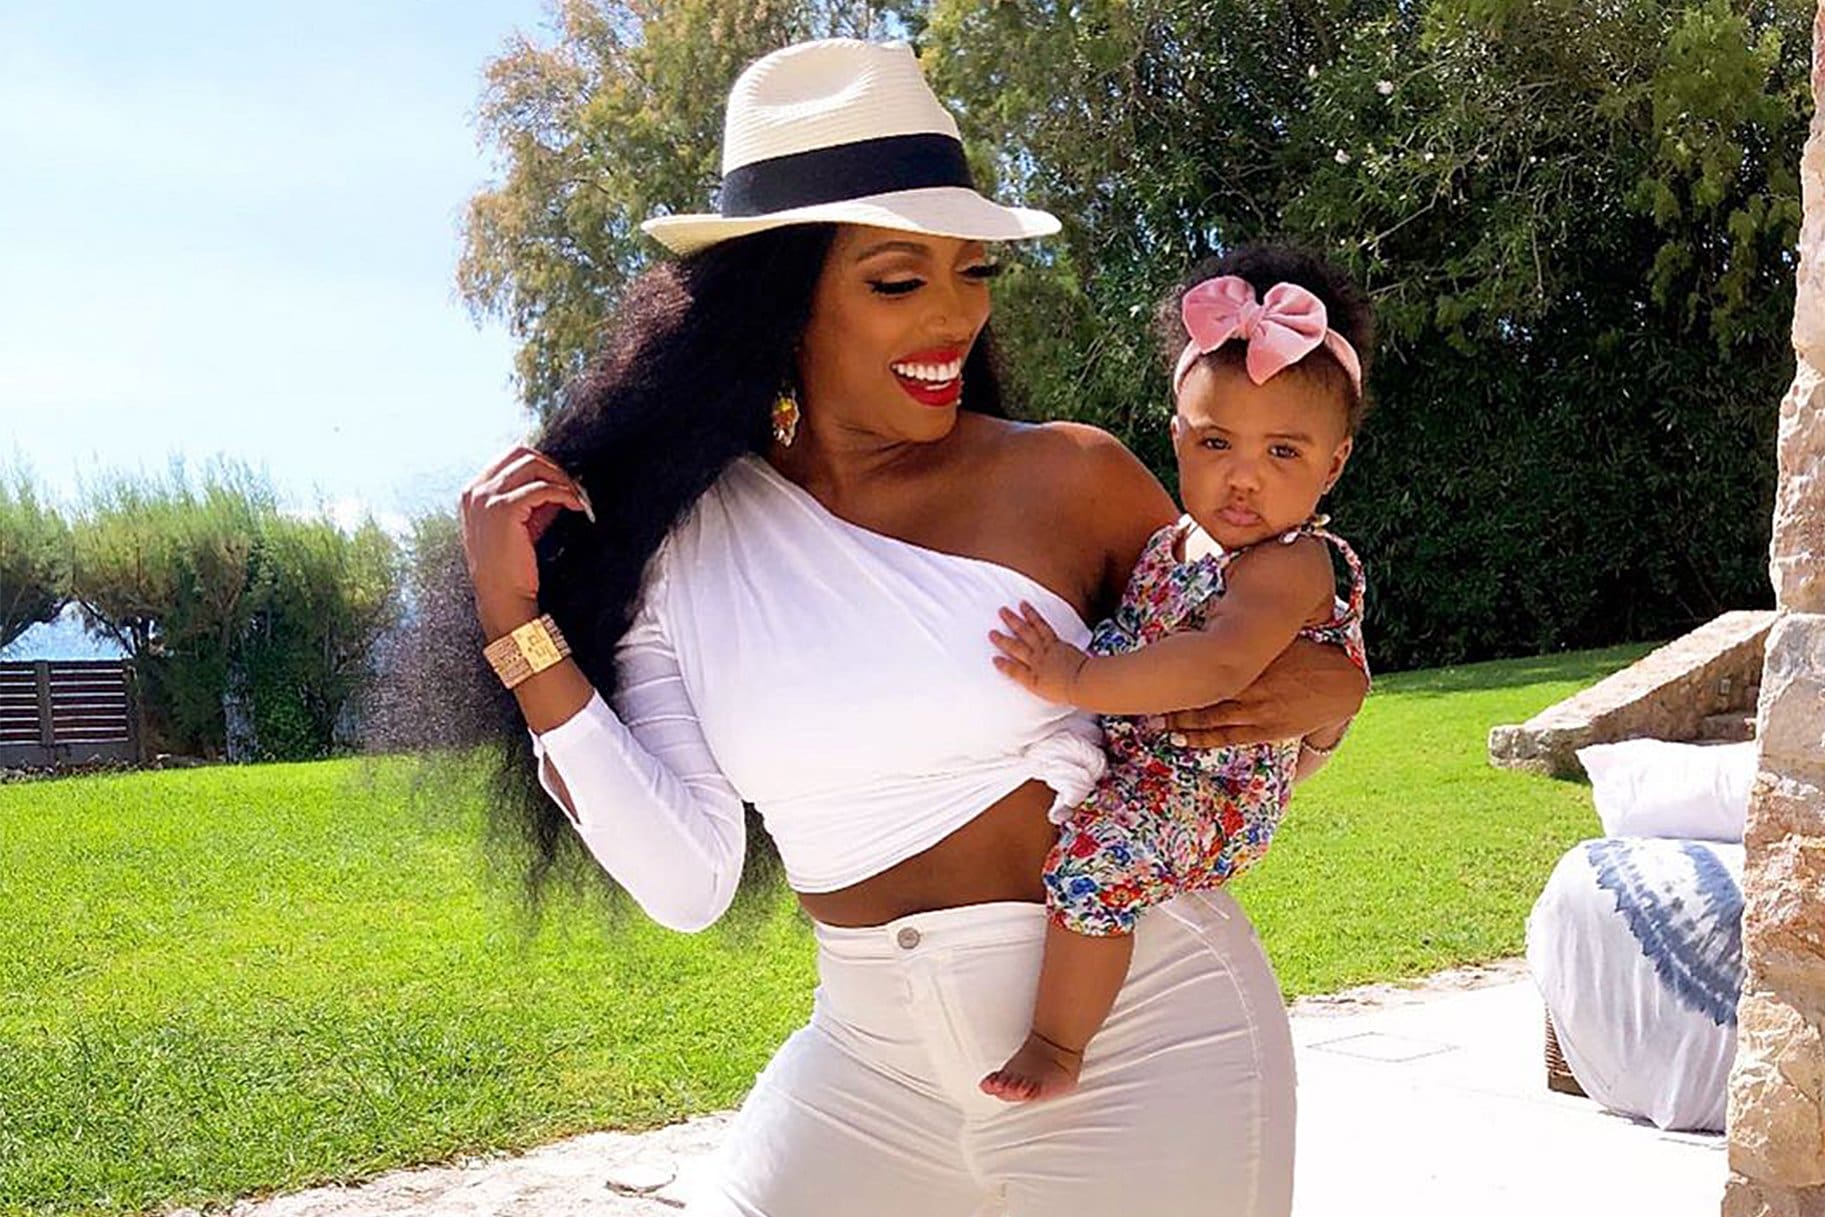 Porsha Williams' Latest Photo Has Fans Saying She's Twinning With Her Baby Girl, PJ